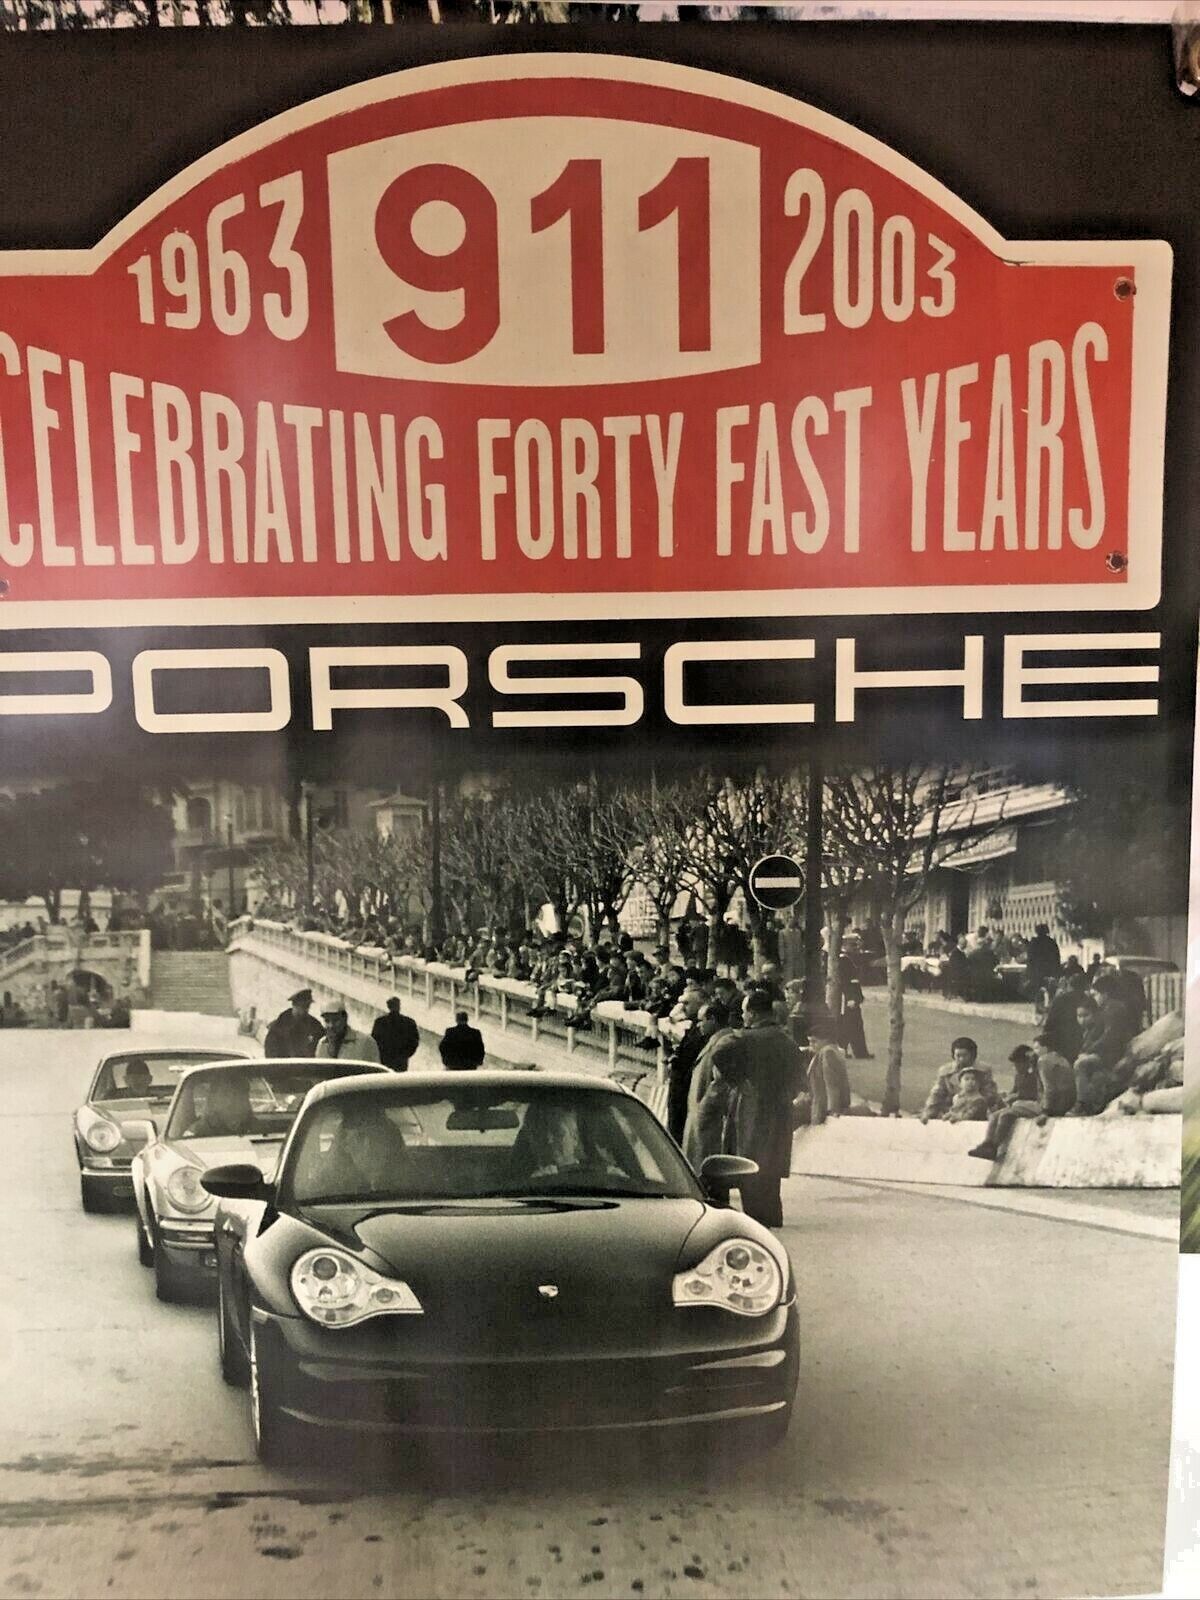 AWESOME FACTORY Original Porsche Poster 1963- 2003 911Celebrating 40 Fast Years